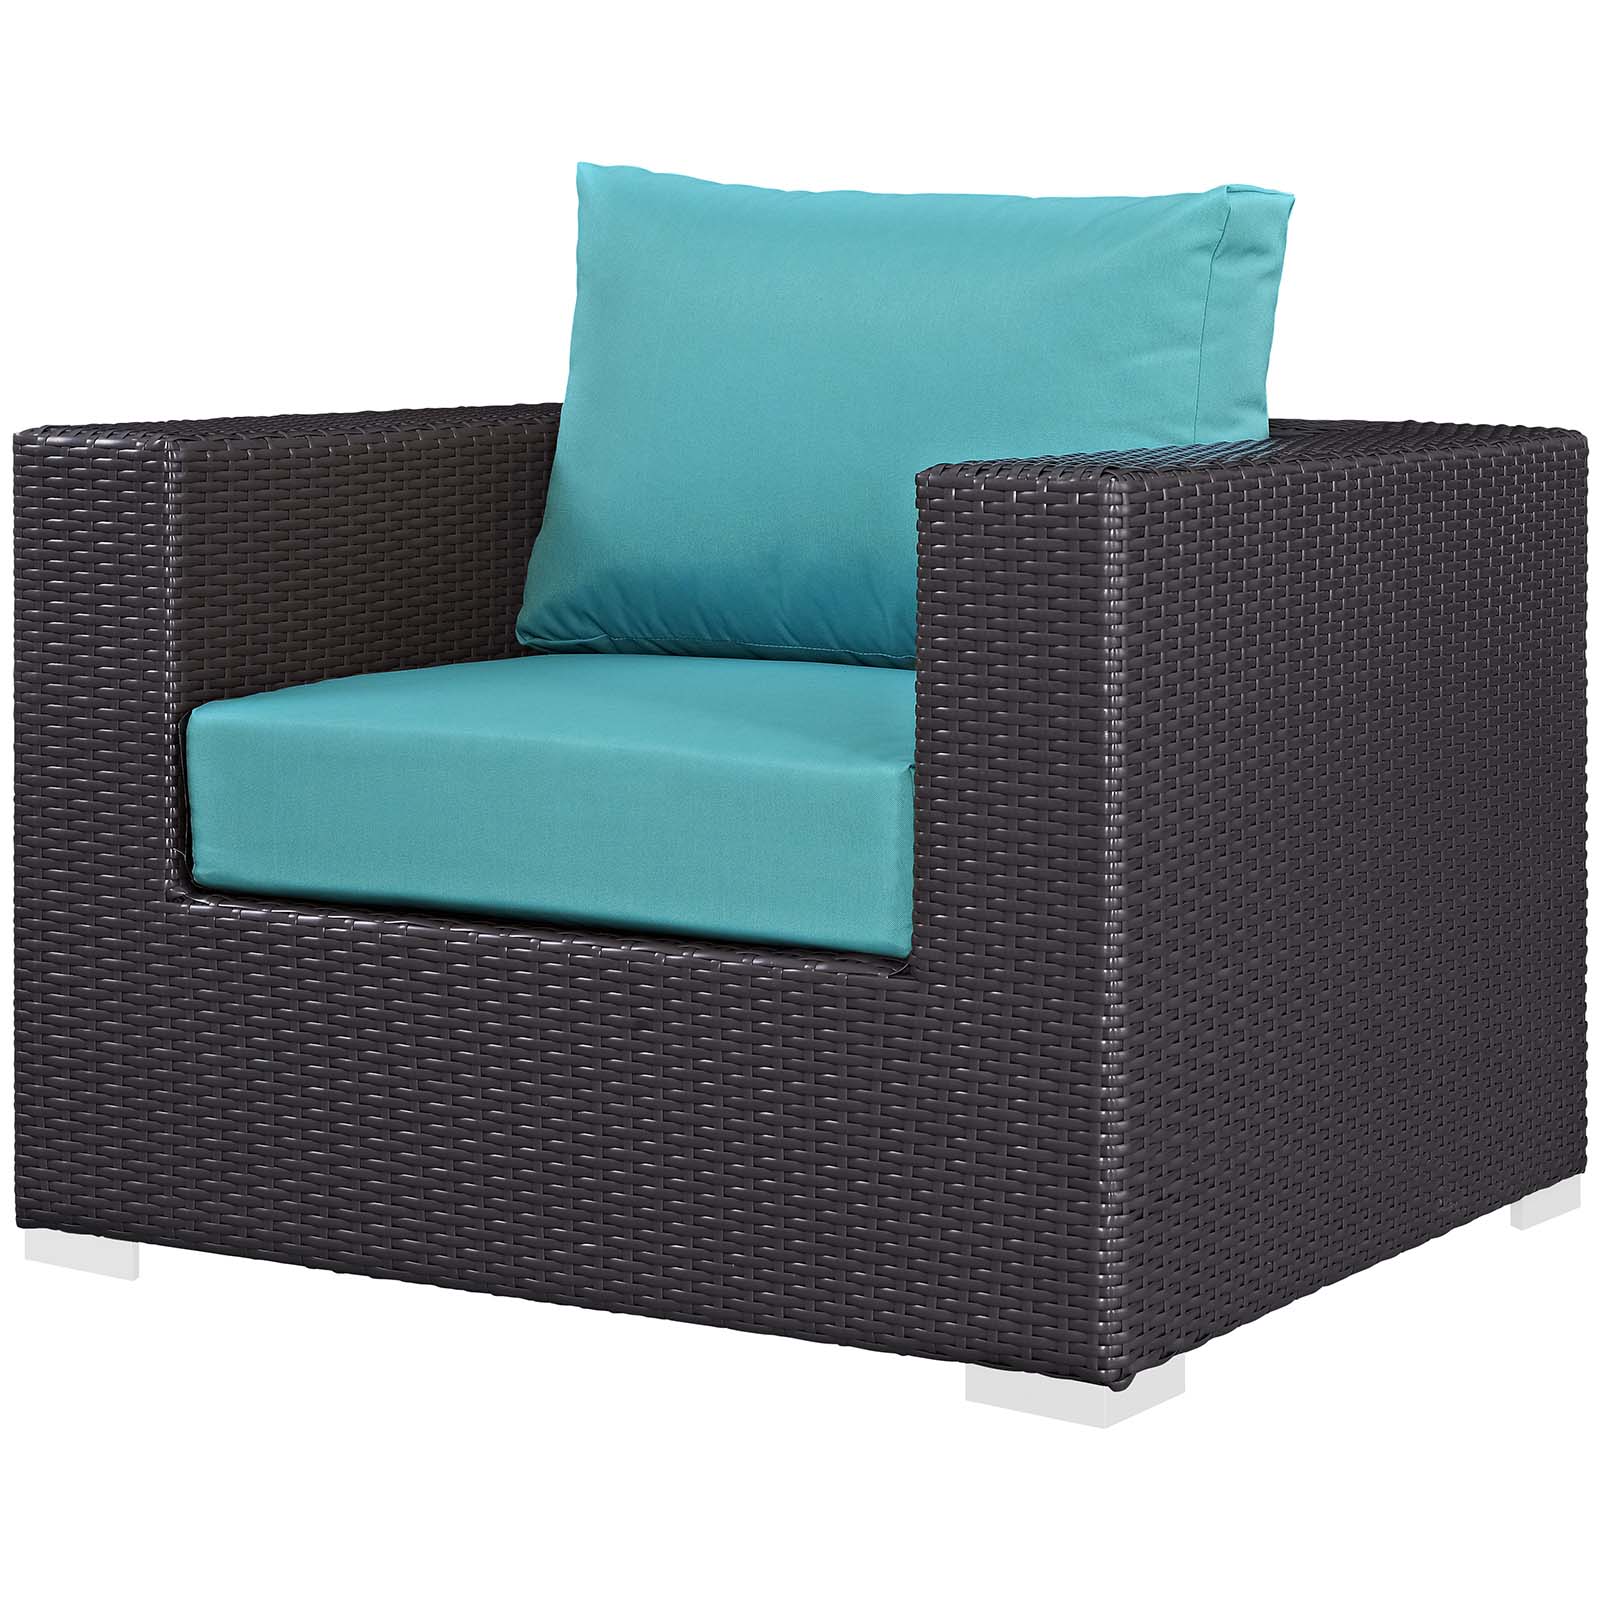 Contemporary Modern Urban Designer Outdoor Patio Balcony Garden Furniture Lounge Sofa, Chair and Coffee Table Fire Pit Set, Fabric Rattan Wicker, Blue - image 3 of 8